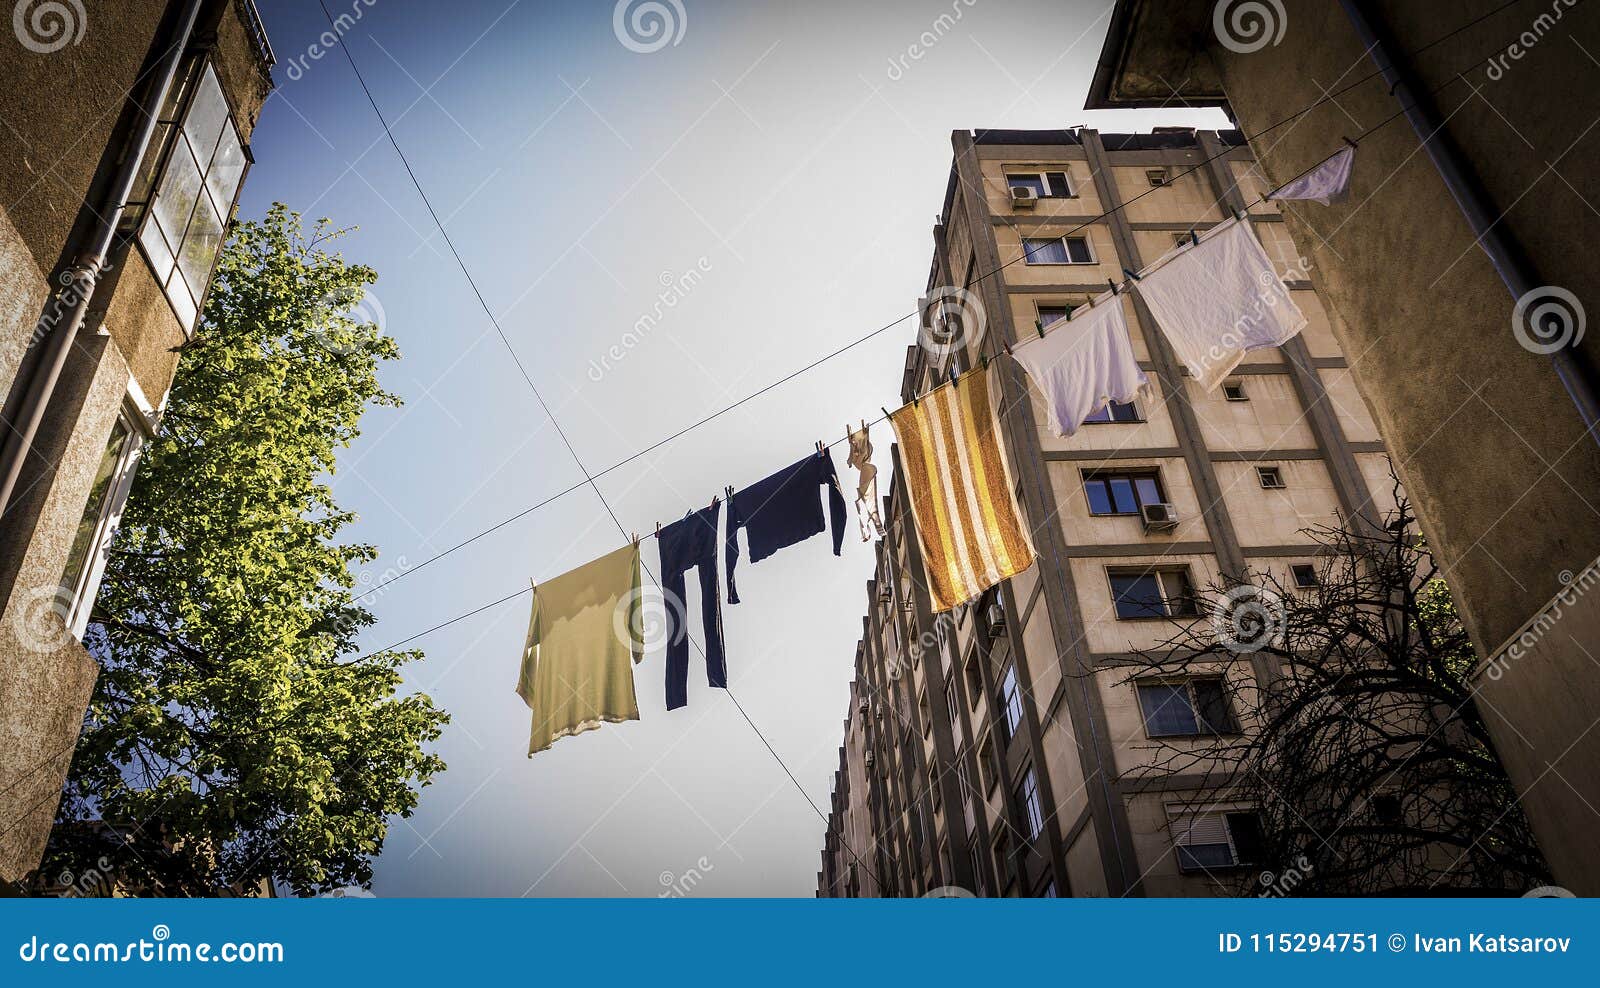 a laundry stretched out on the street drying in the midday sun.